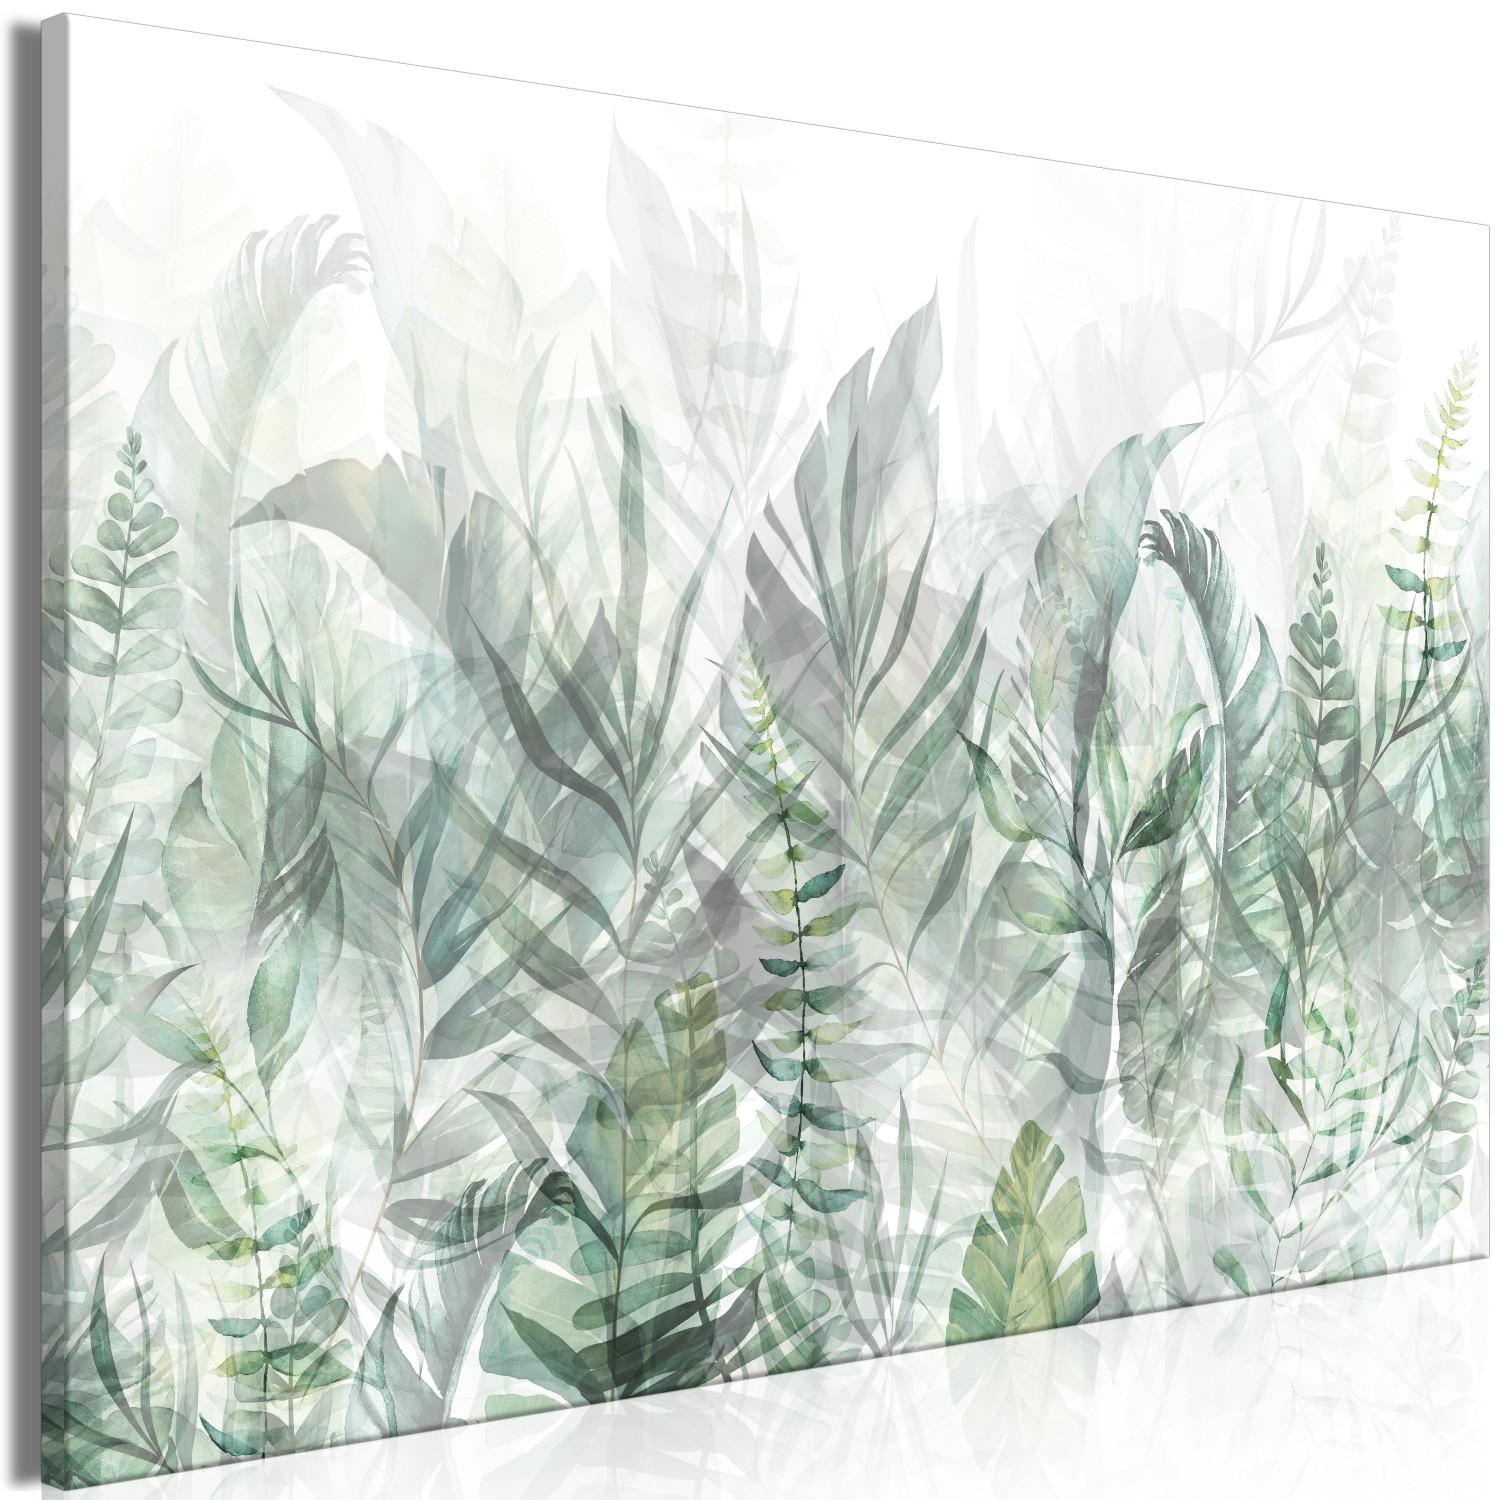 Cuadro Wild Meadow - Lush Vegetation Interpenetrating on a White Background